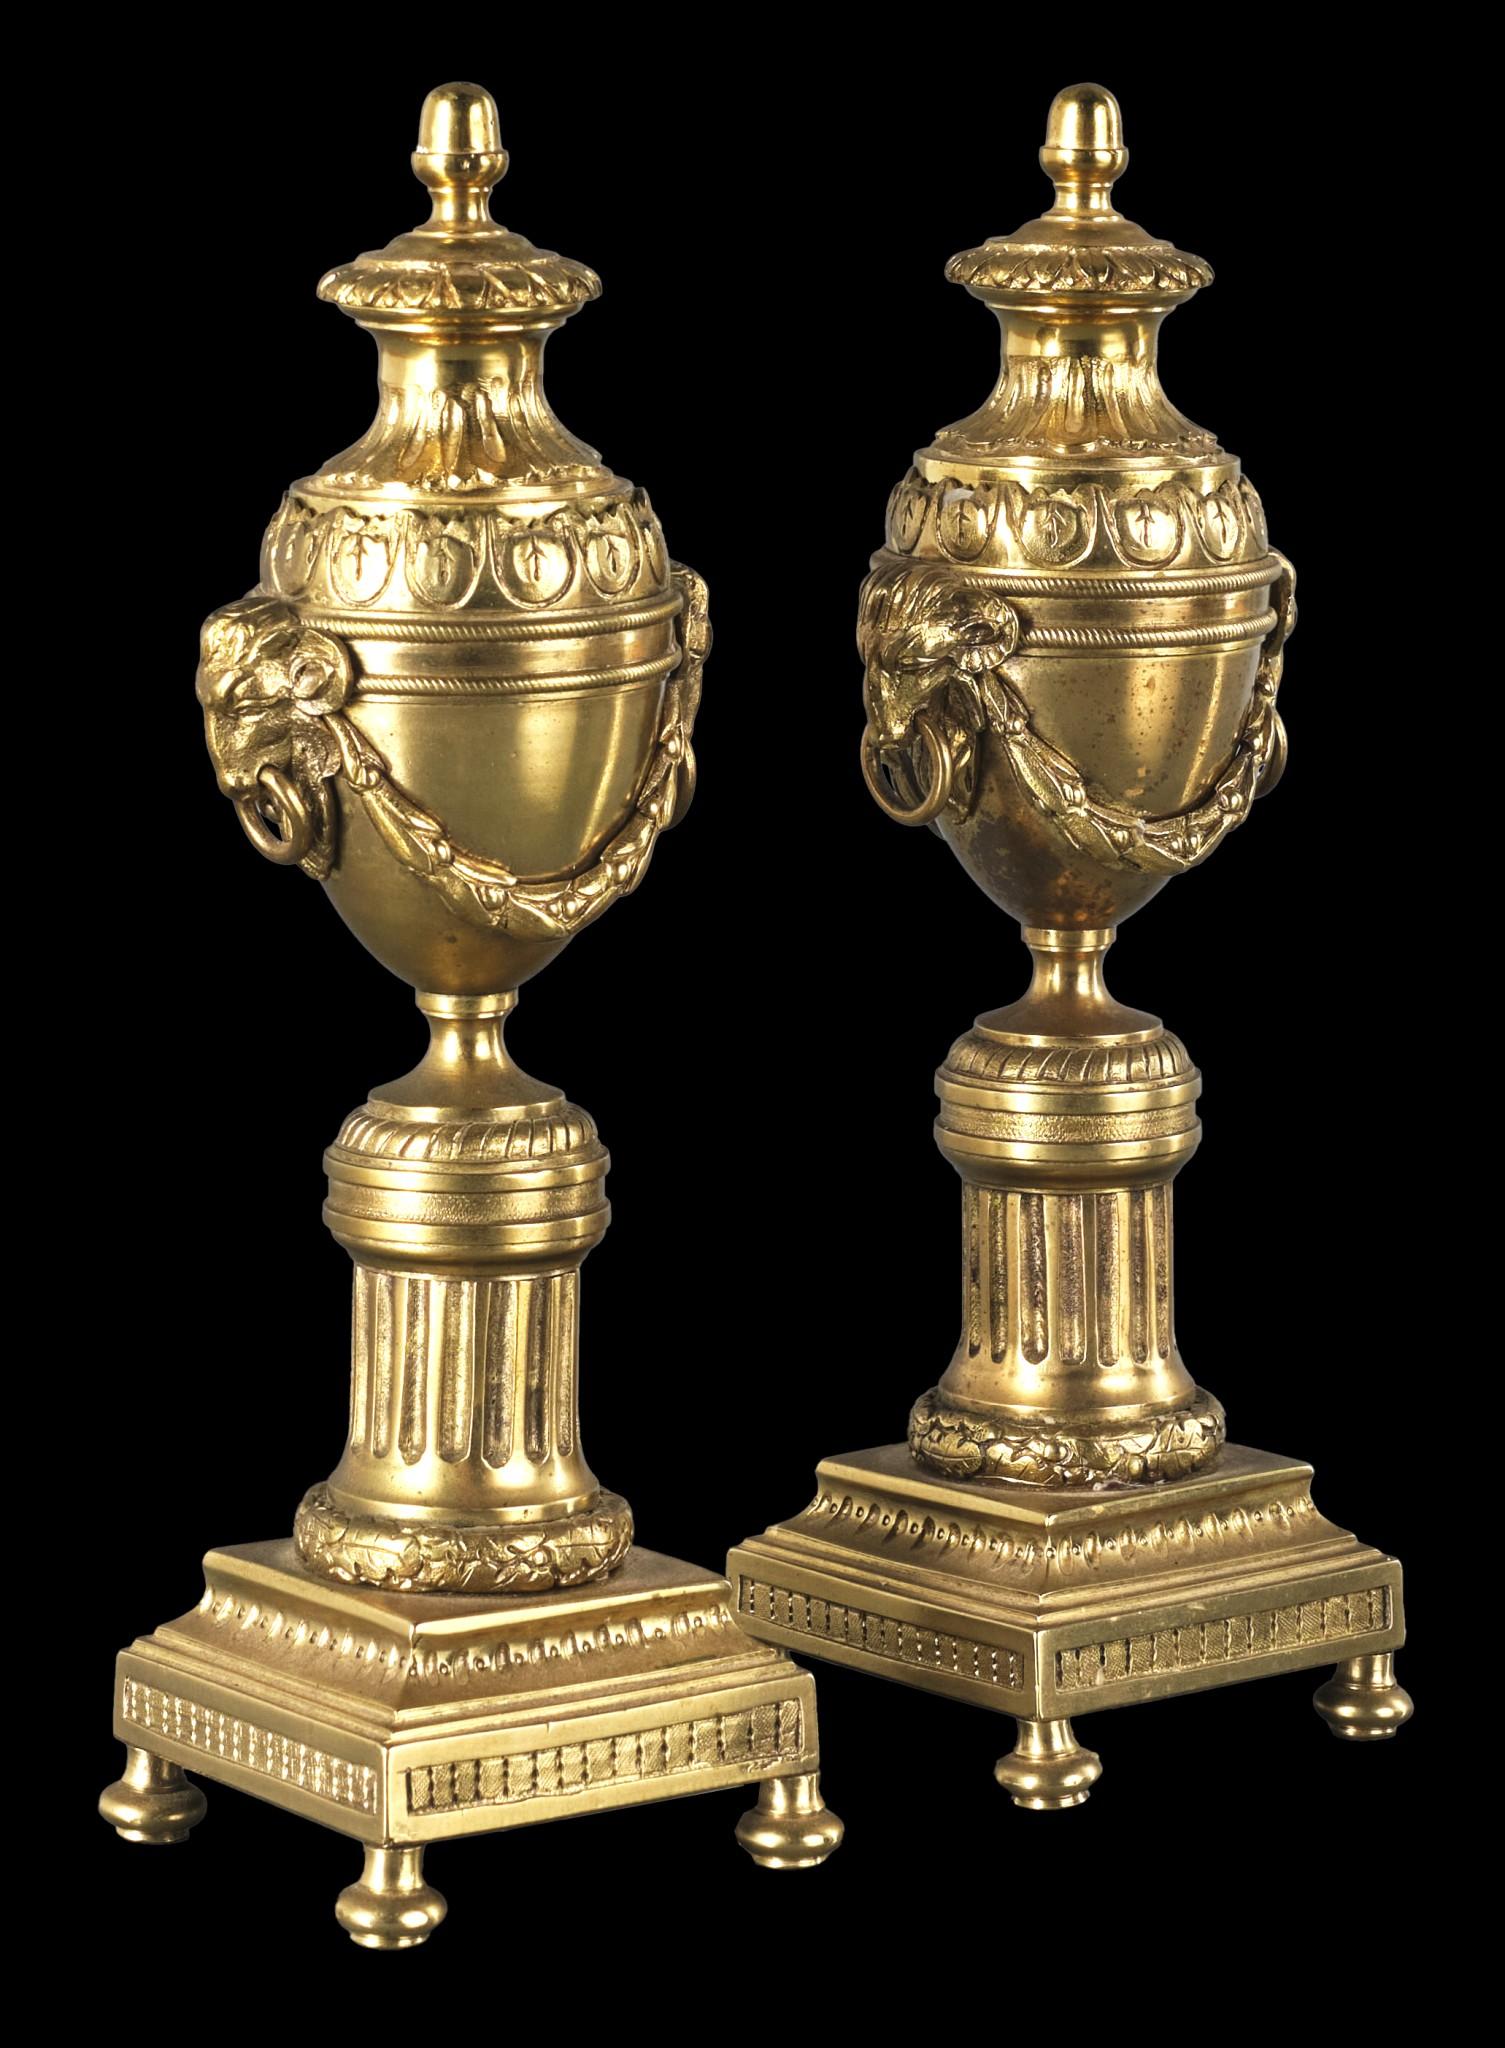 Neoclassical Revival A Fine Pair of 19th C. Neoclassical Style Gilt Bronze Cassolettes / Candlesticks For Sale